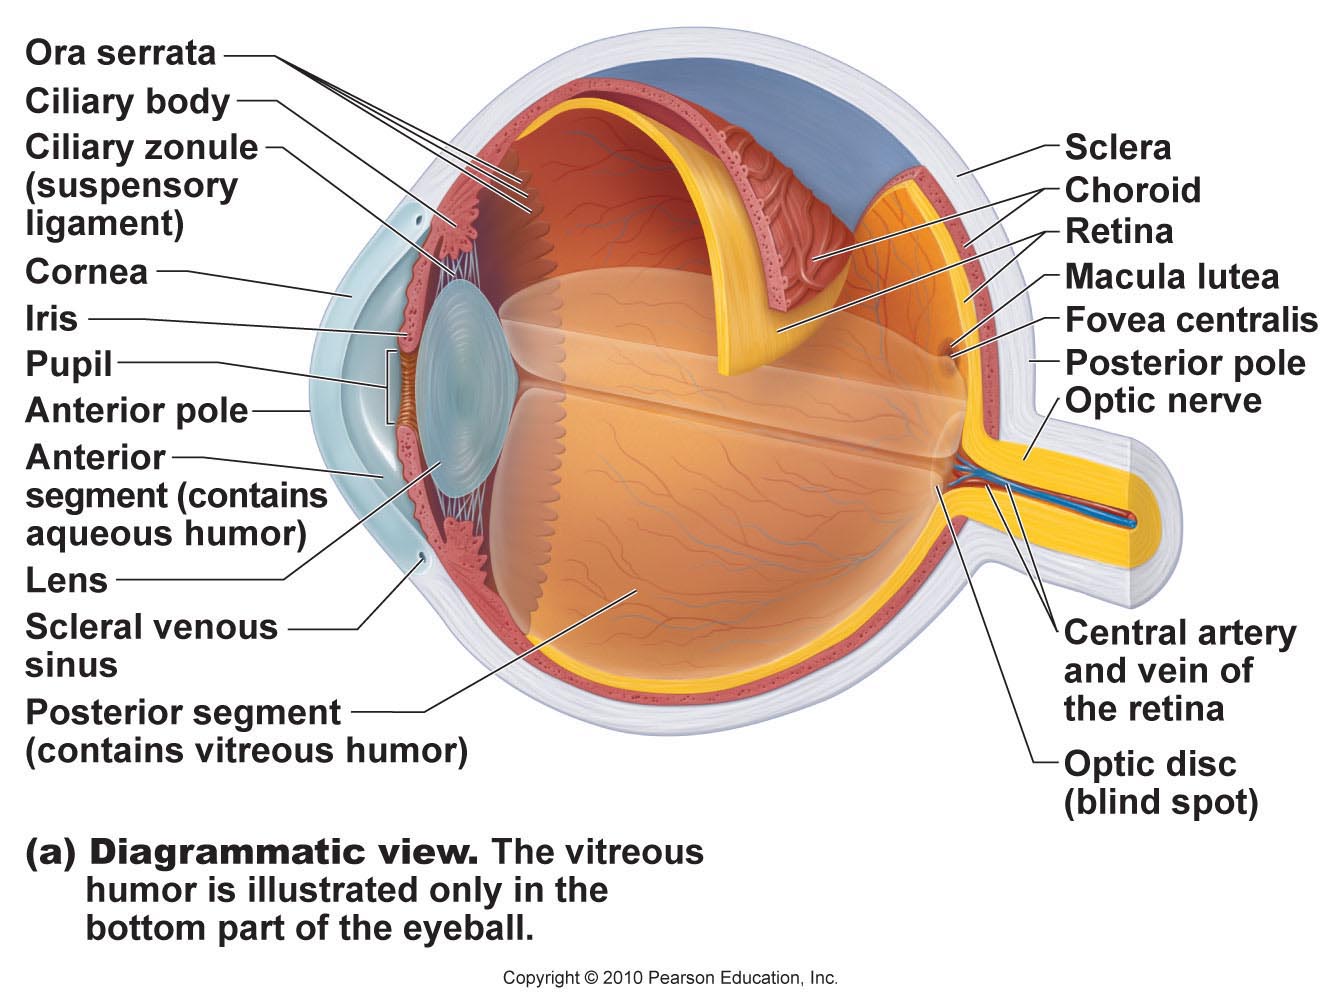 Detailed Diagrams of the Eye and Its Components - Beaumont Vision